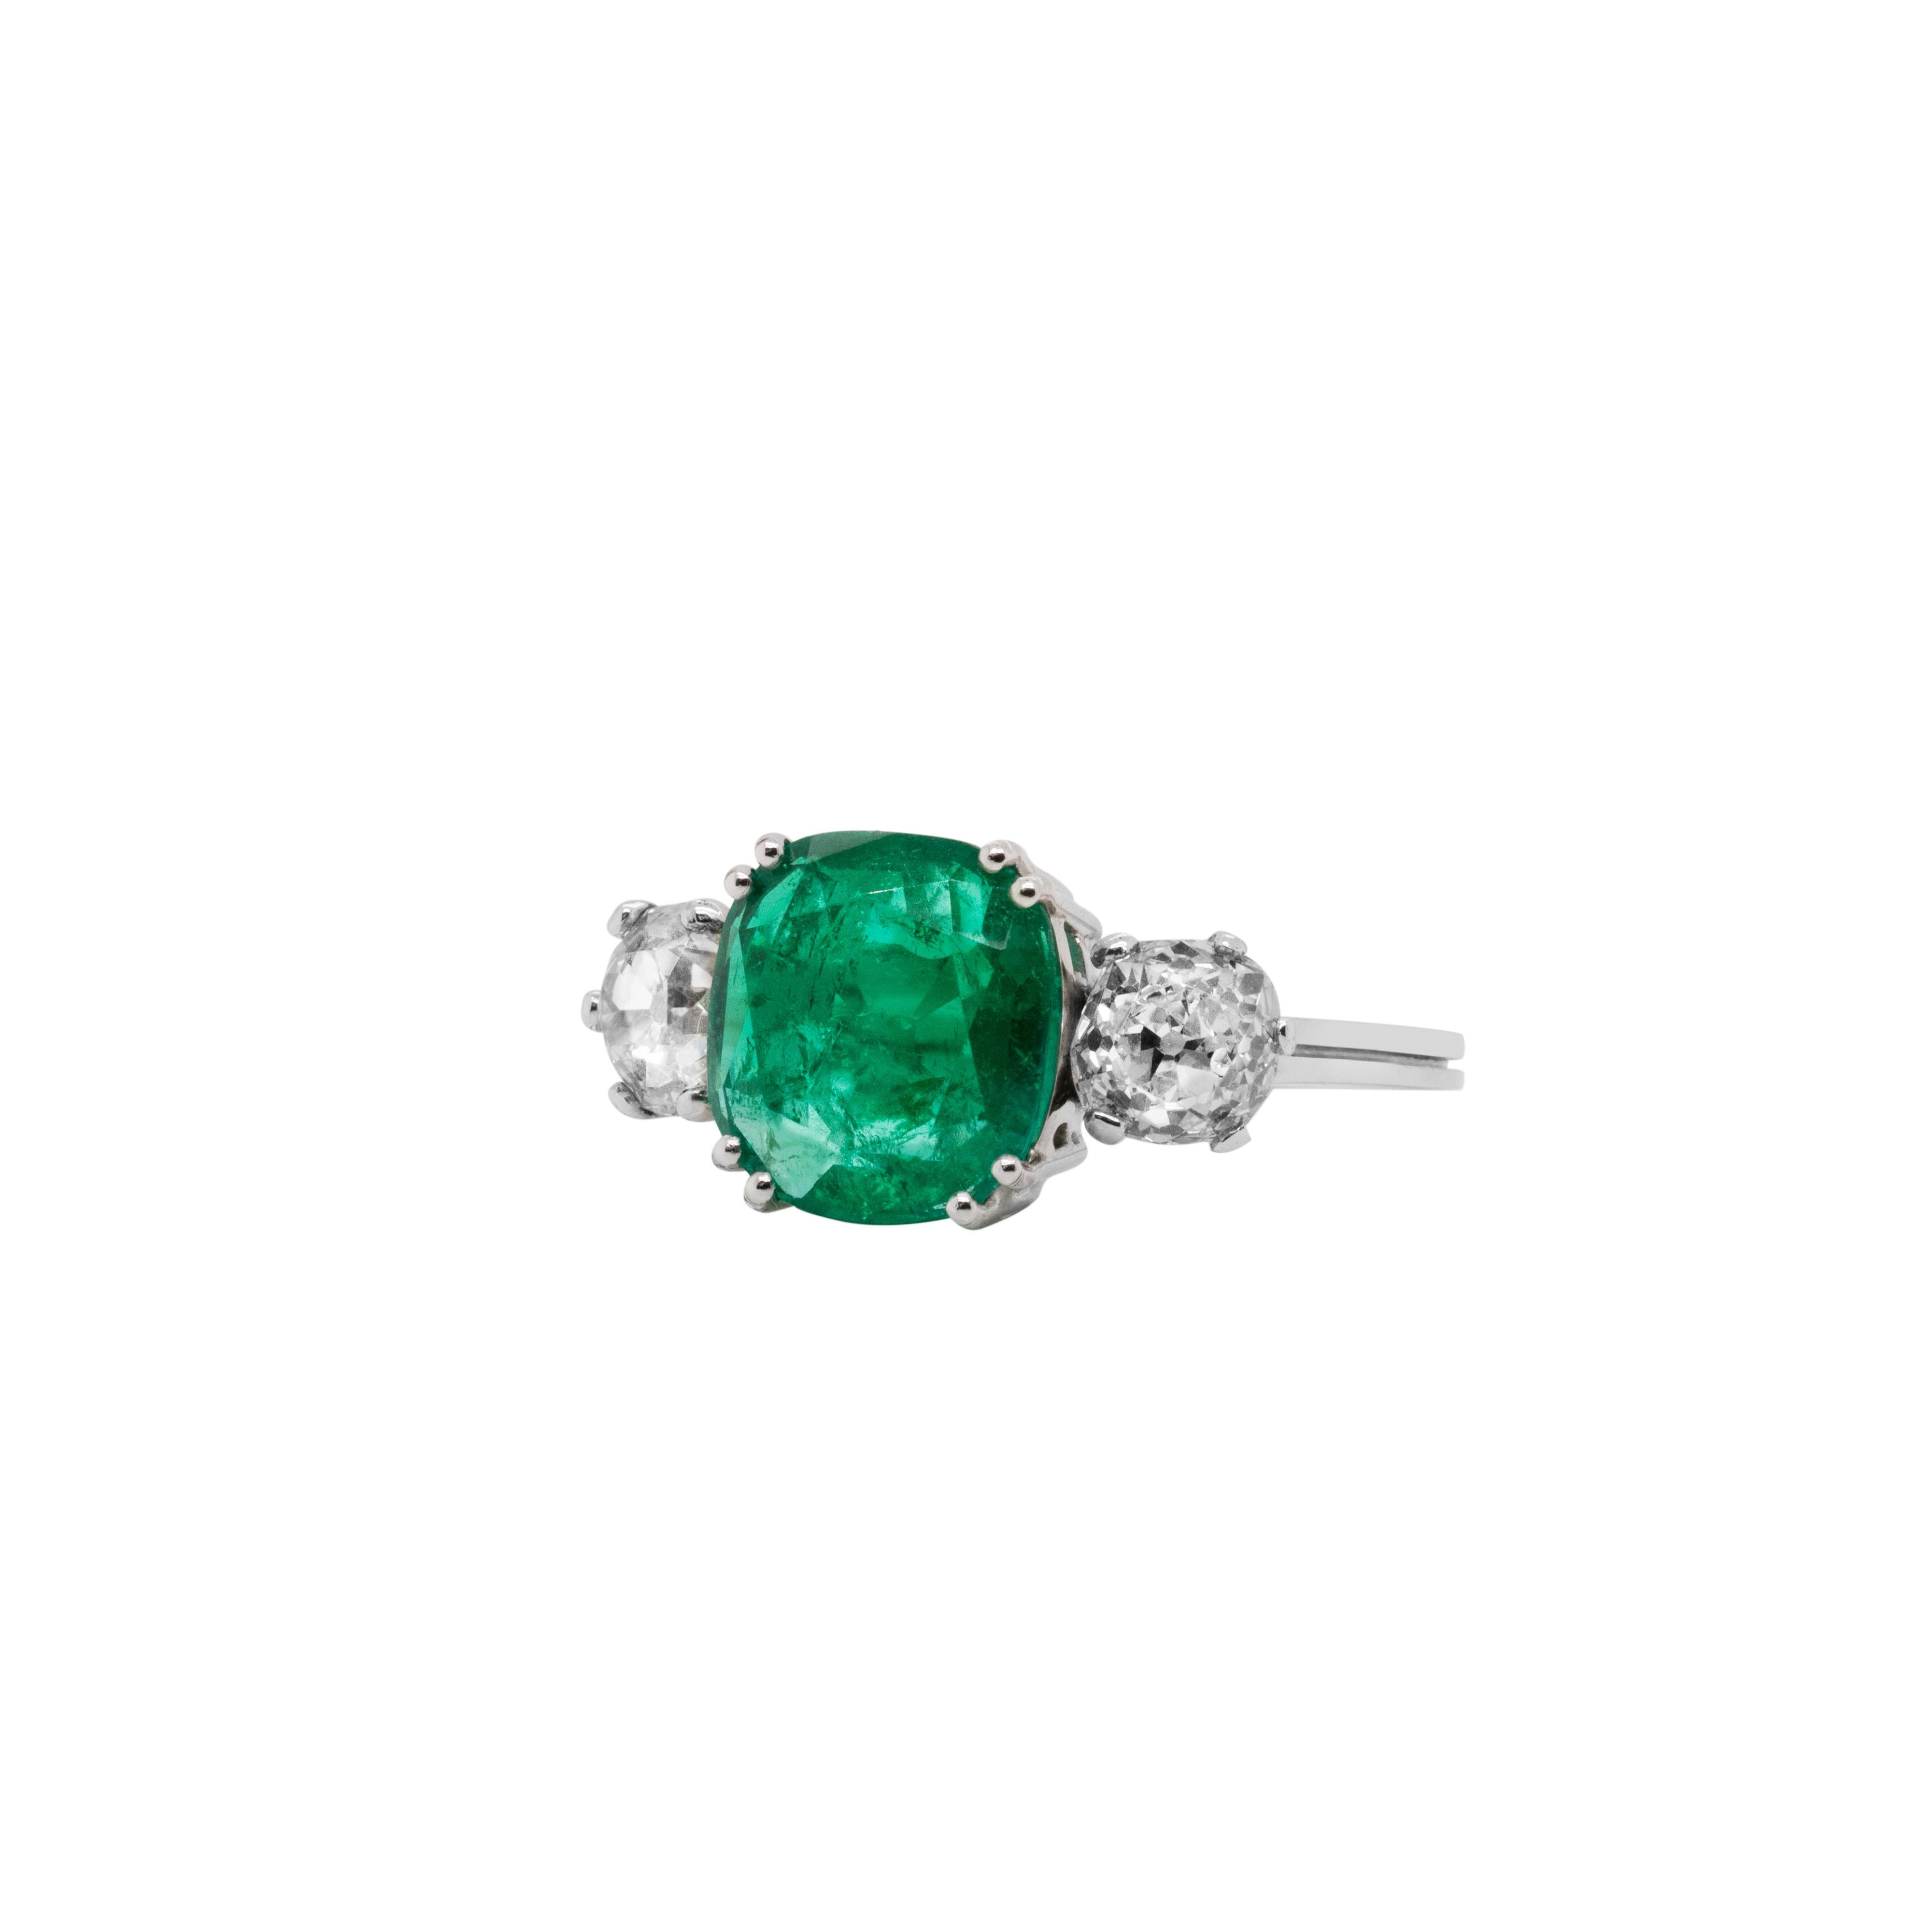 This gorgeous vintage three-stone engagement ring features a rectangular cushion cut Colombian emerald weighing 2.58 carats, mounted in a four double claw, open back setting. The vibrant green gemstone is beautifully accompanied by a Victorian old